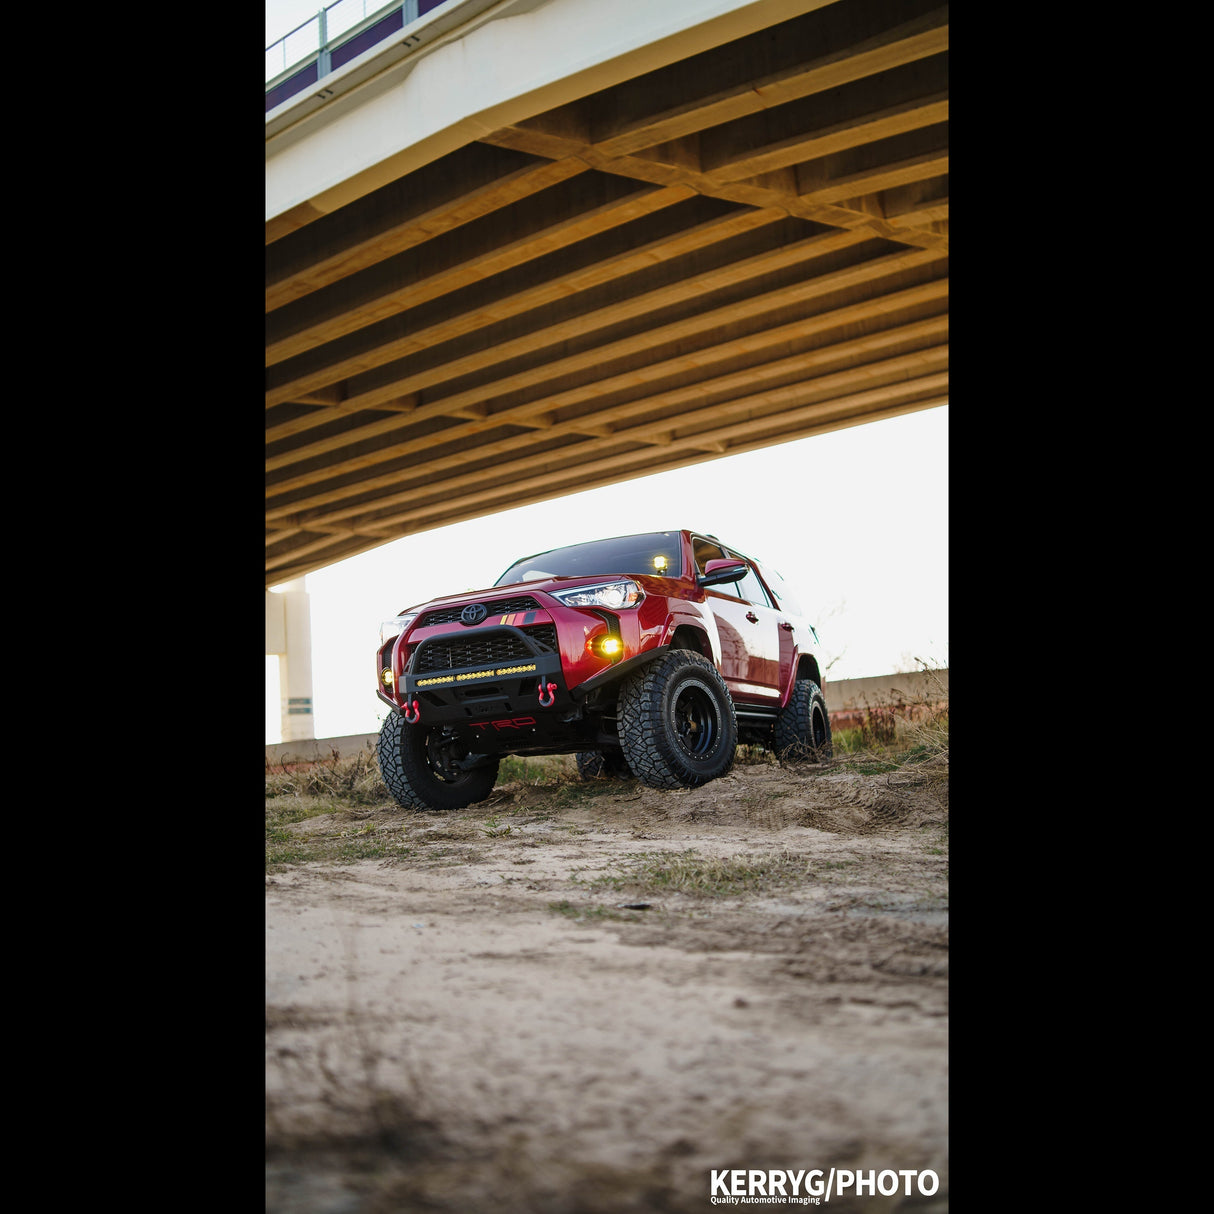 4Runner Lo Pro Bumper High Clearance Additions / 5th Gen / 2014+ - Roam Overland Outfitters